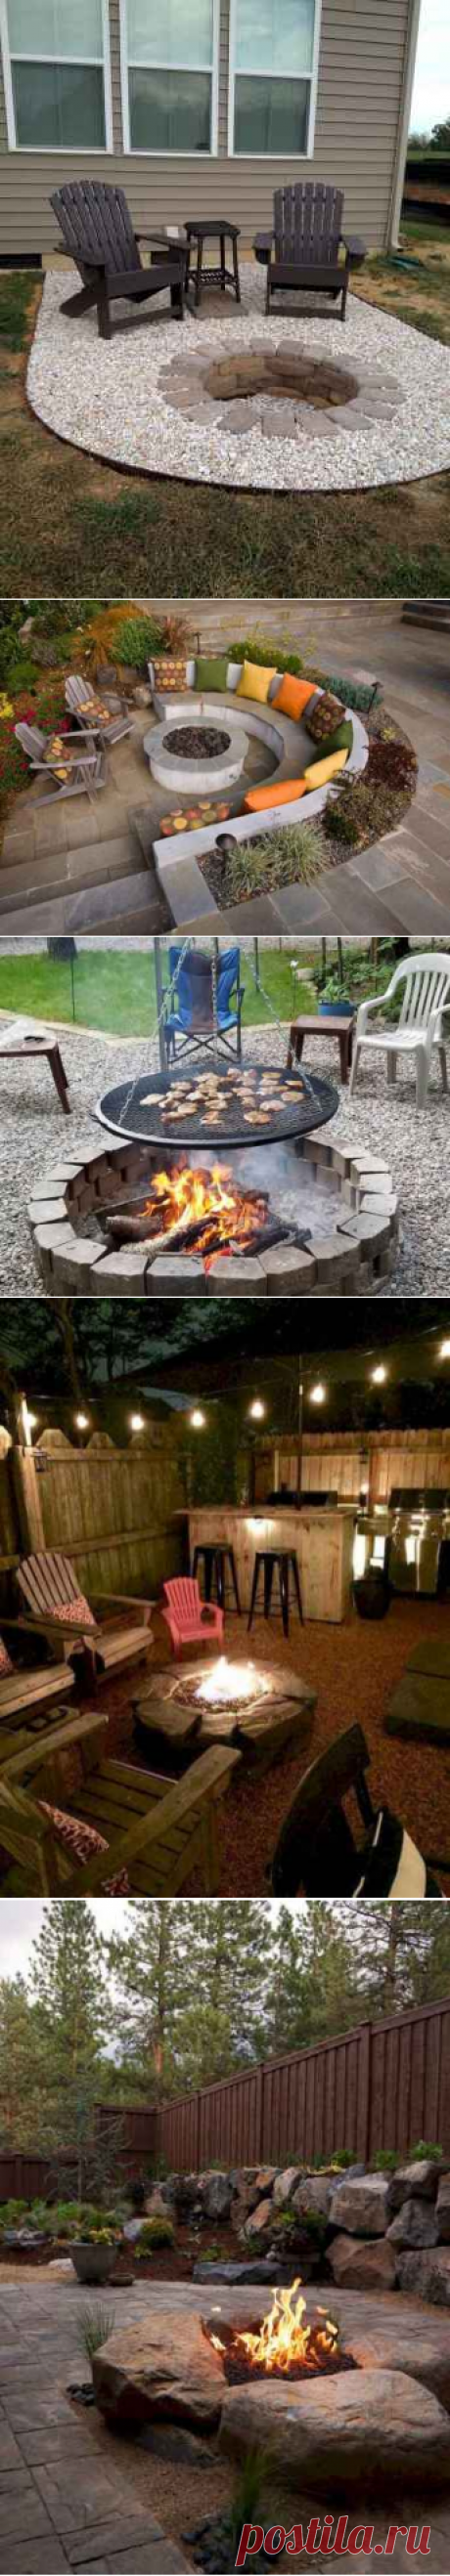 75 Easy and Cheap Fire Pit and Backyard Landscaping Ideas - spaciroom.com